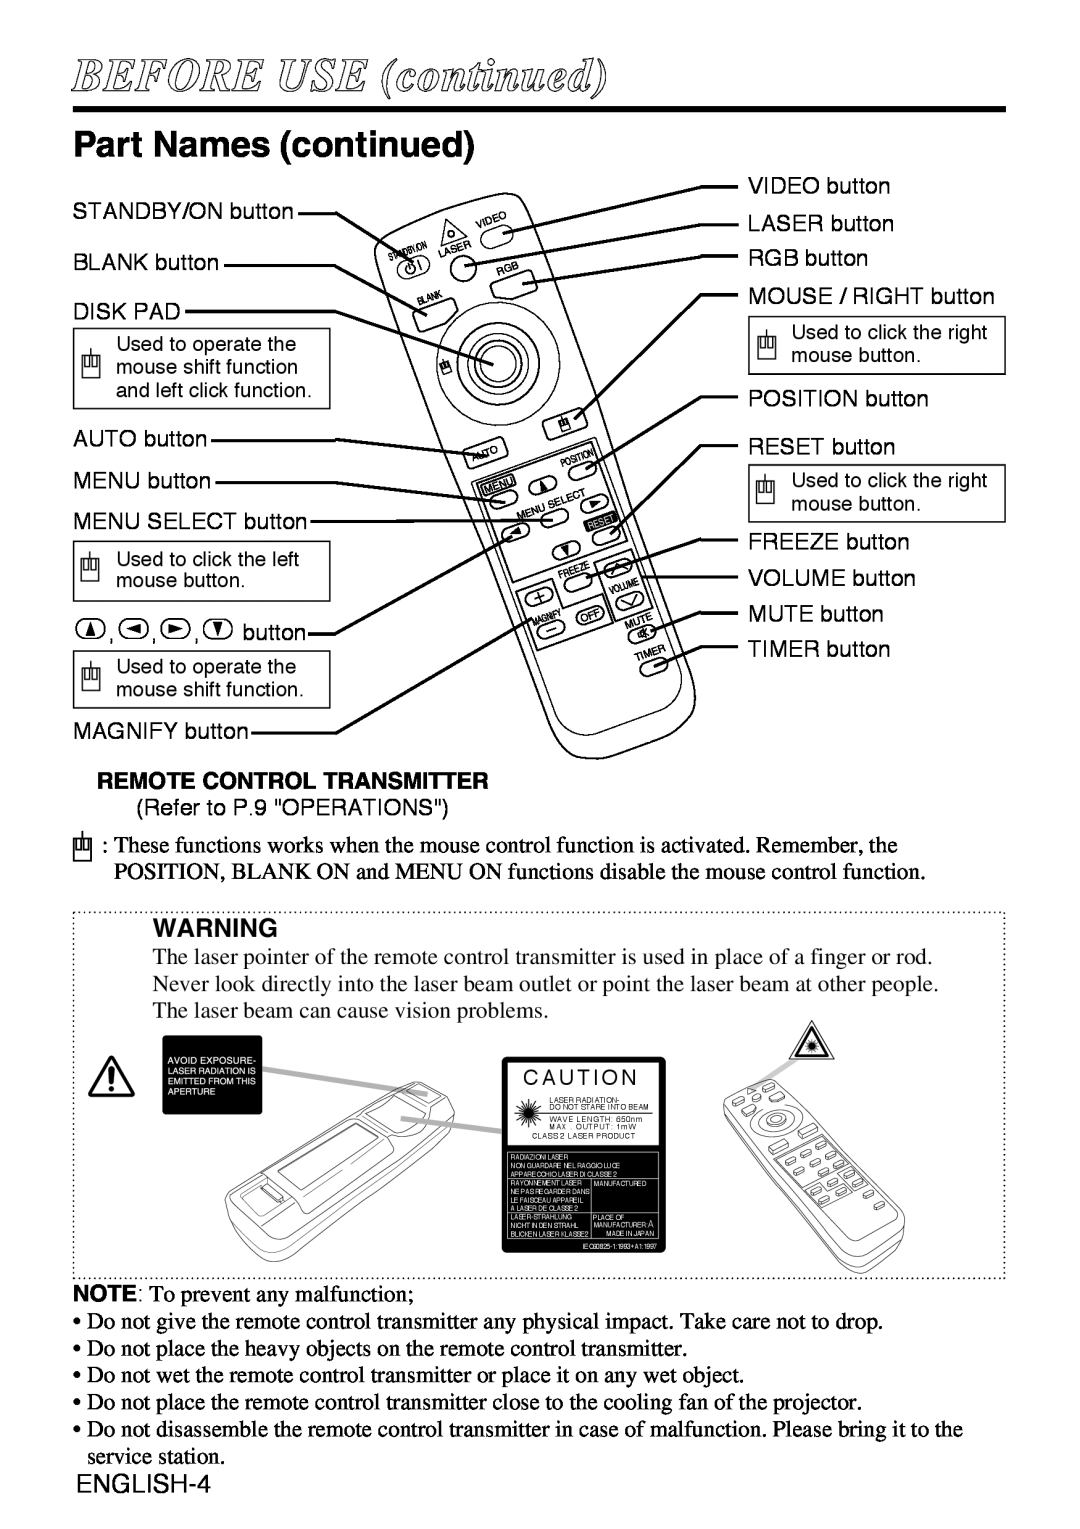 Liesegang dv335 user manual Part Names continued, ENGLISH-4, Remote Control Transmitter, BEFORE USE continued 